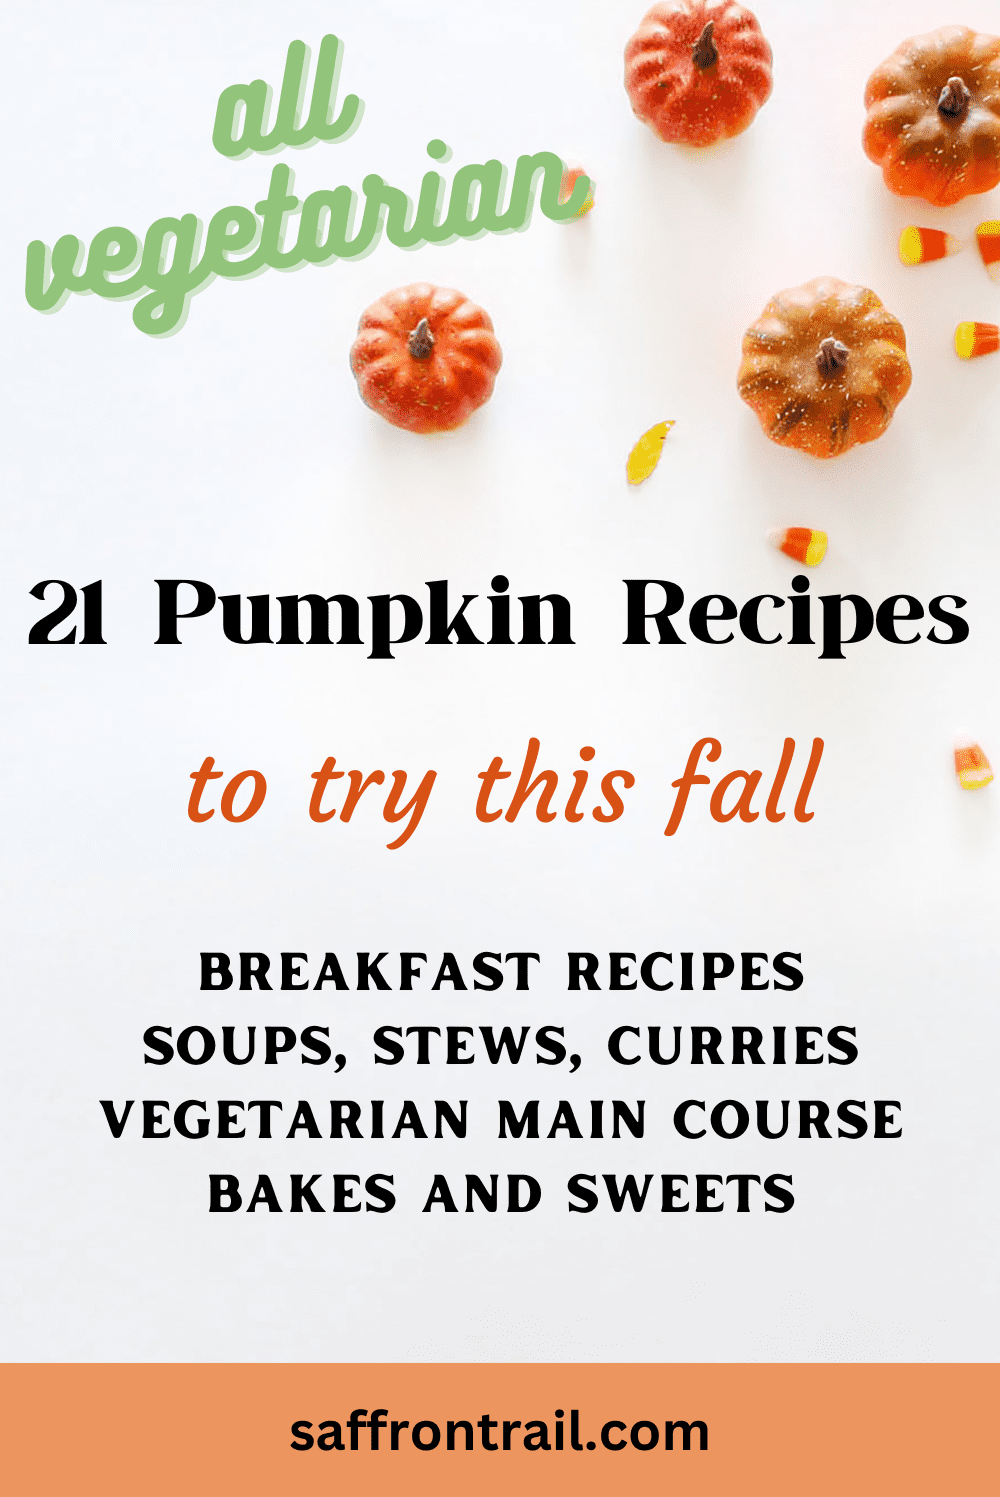 14 Pumpkin Recipes For You To Try This Fall